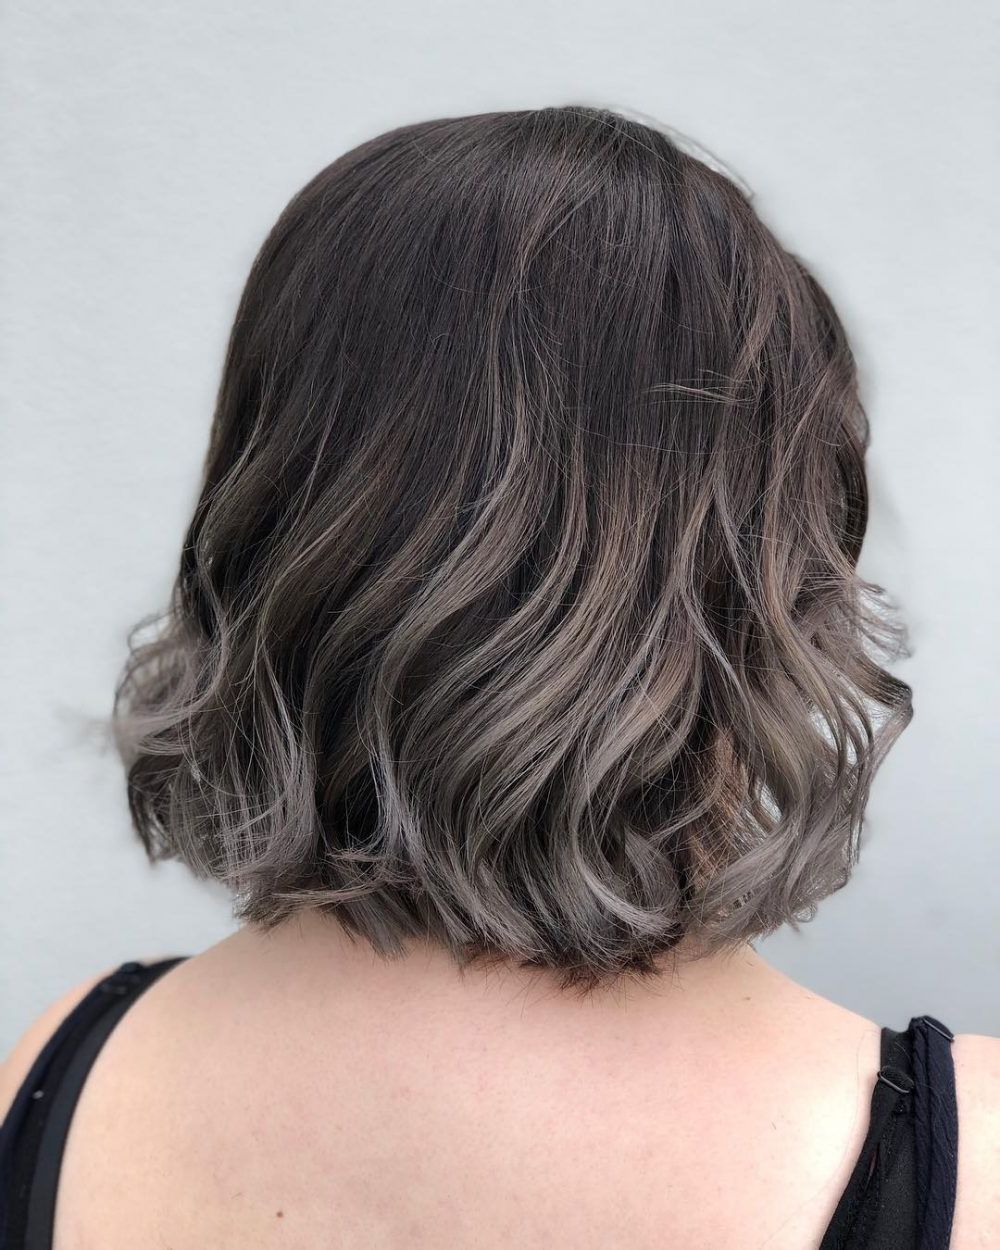 36 Top Short Ombre Hair Ideas Of 2018 With Regard To Short Curly Caramel Brown Bob Hairstyles (View 5 of 25)